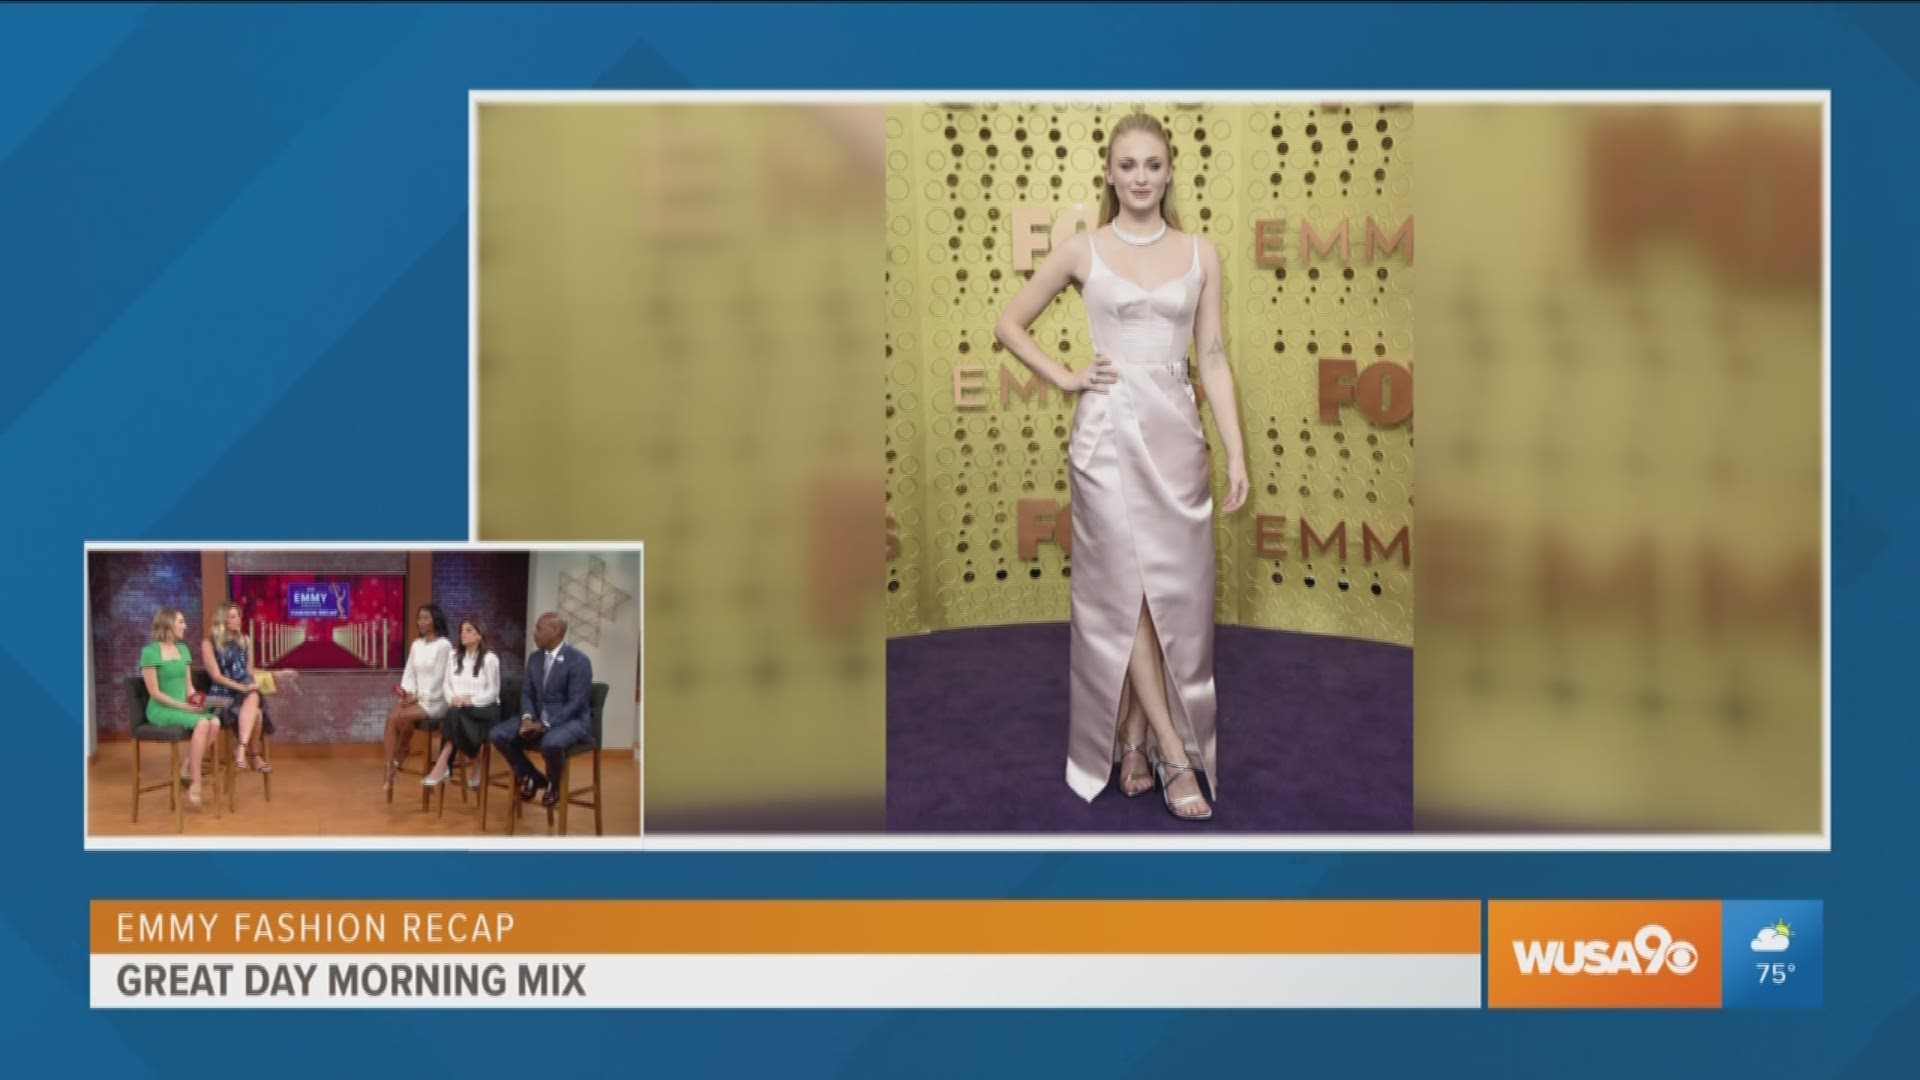 We check out the best in 2019 Emmy Red Carpet fashion with DC Fashion Fool Barnette Holston, Michele Lee Clements of eLevated Style Studio and Stylist Naina Singla.